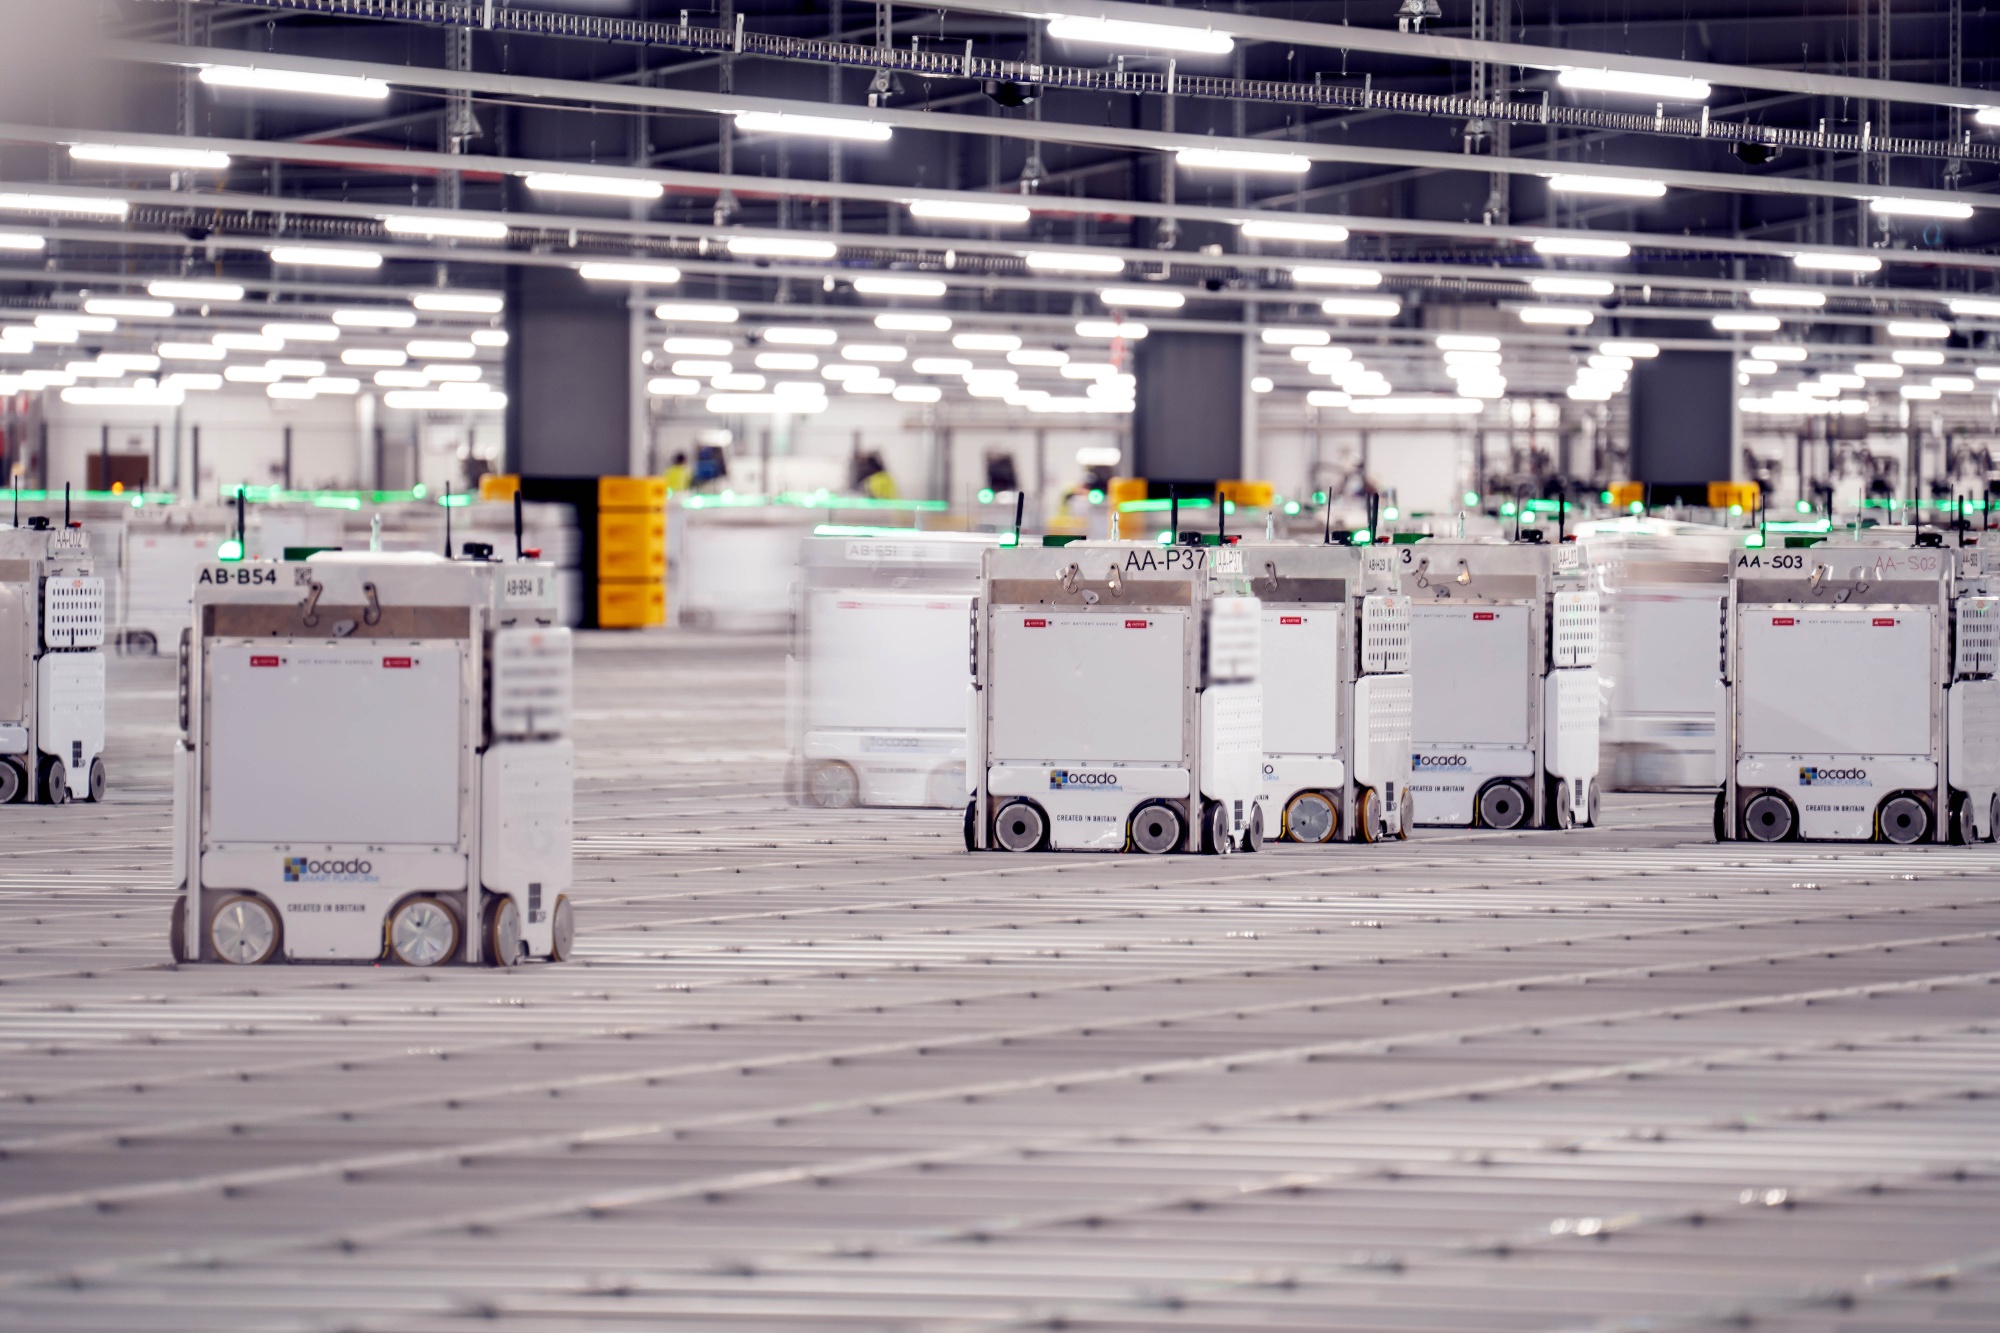 Ocado’s highly automated warehouse in Erith, U.K.